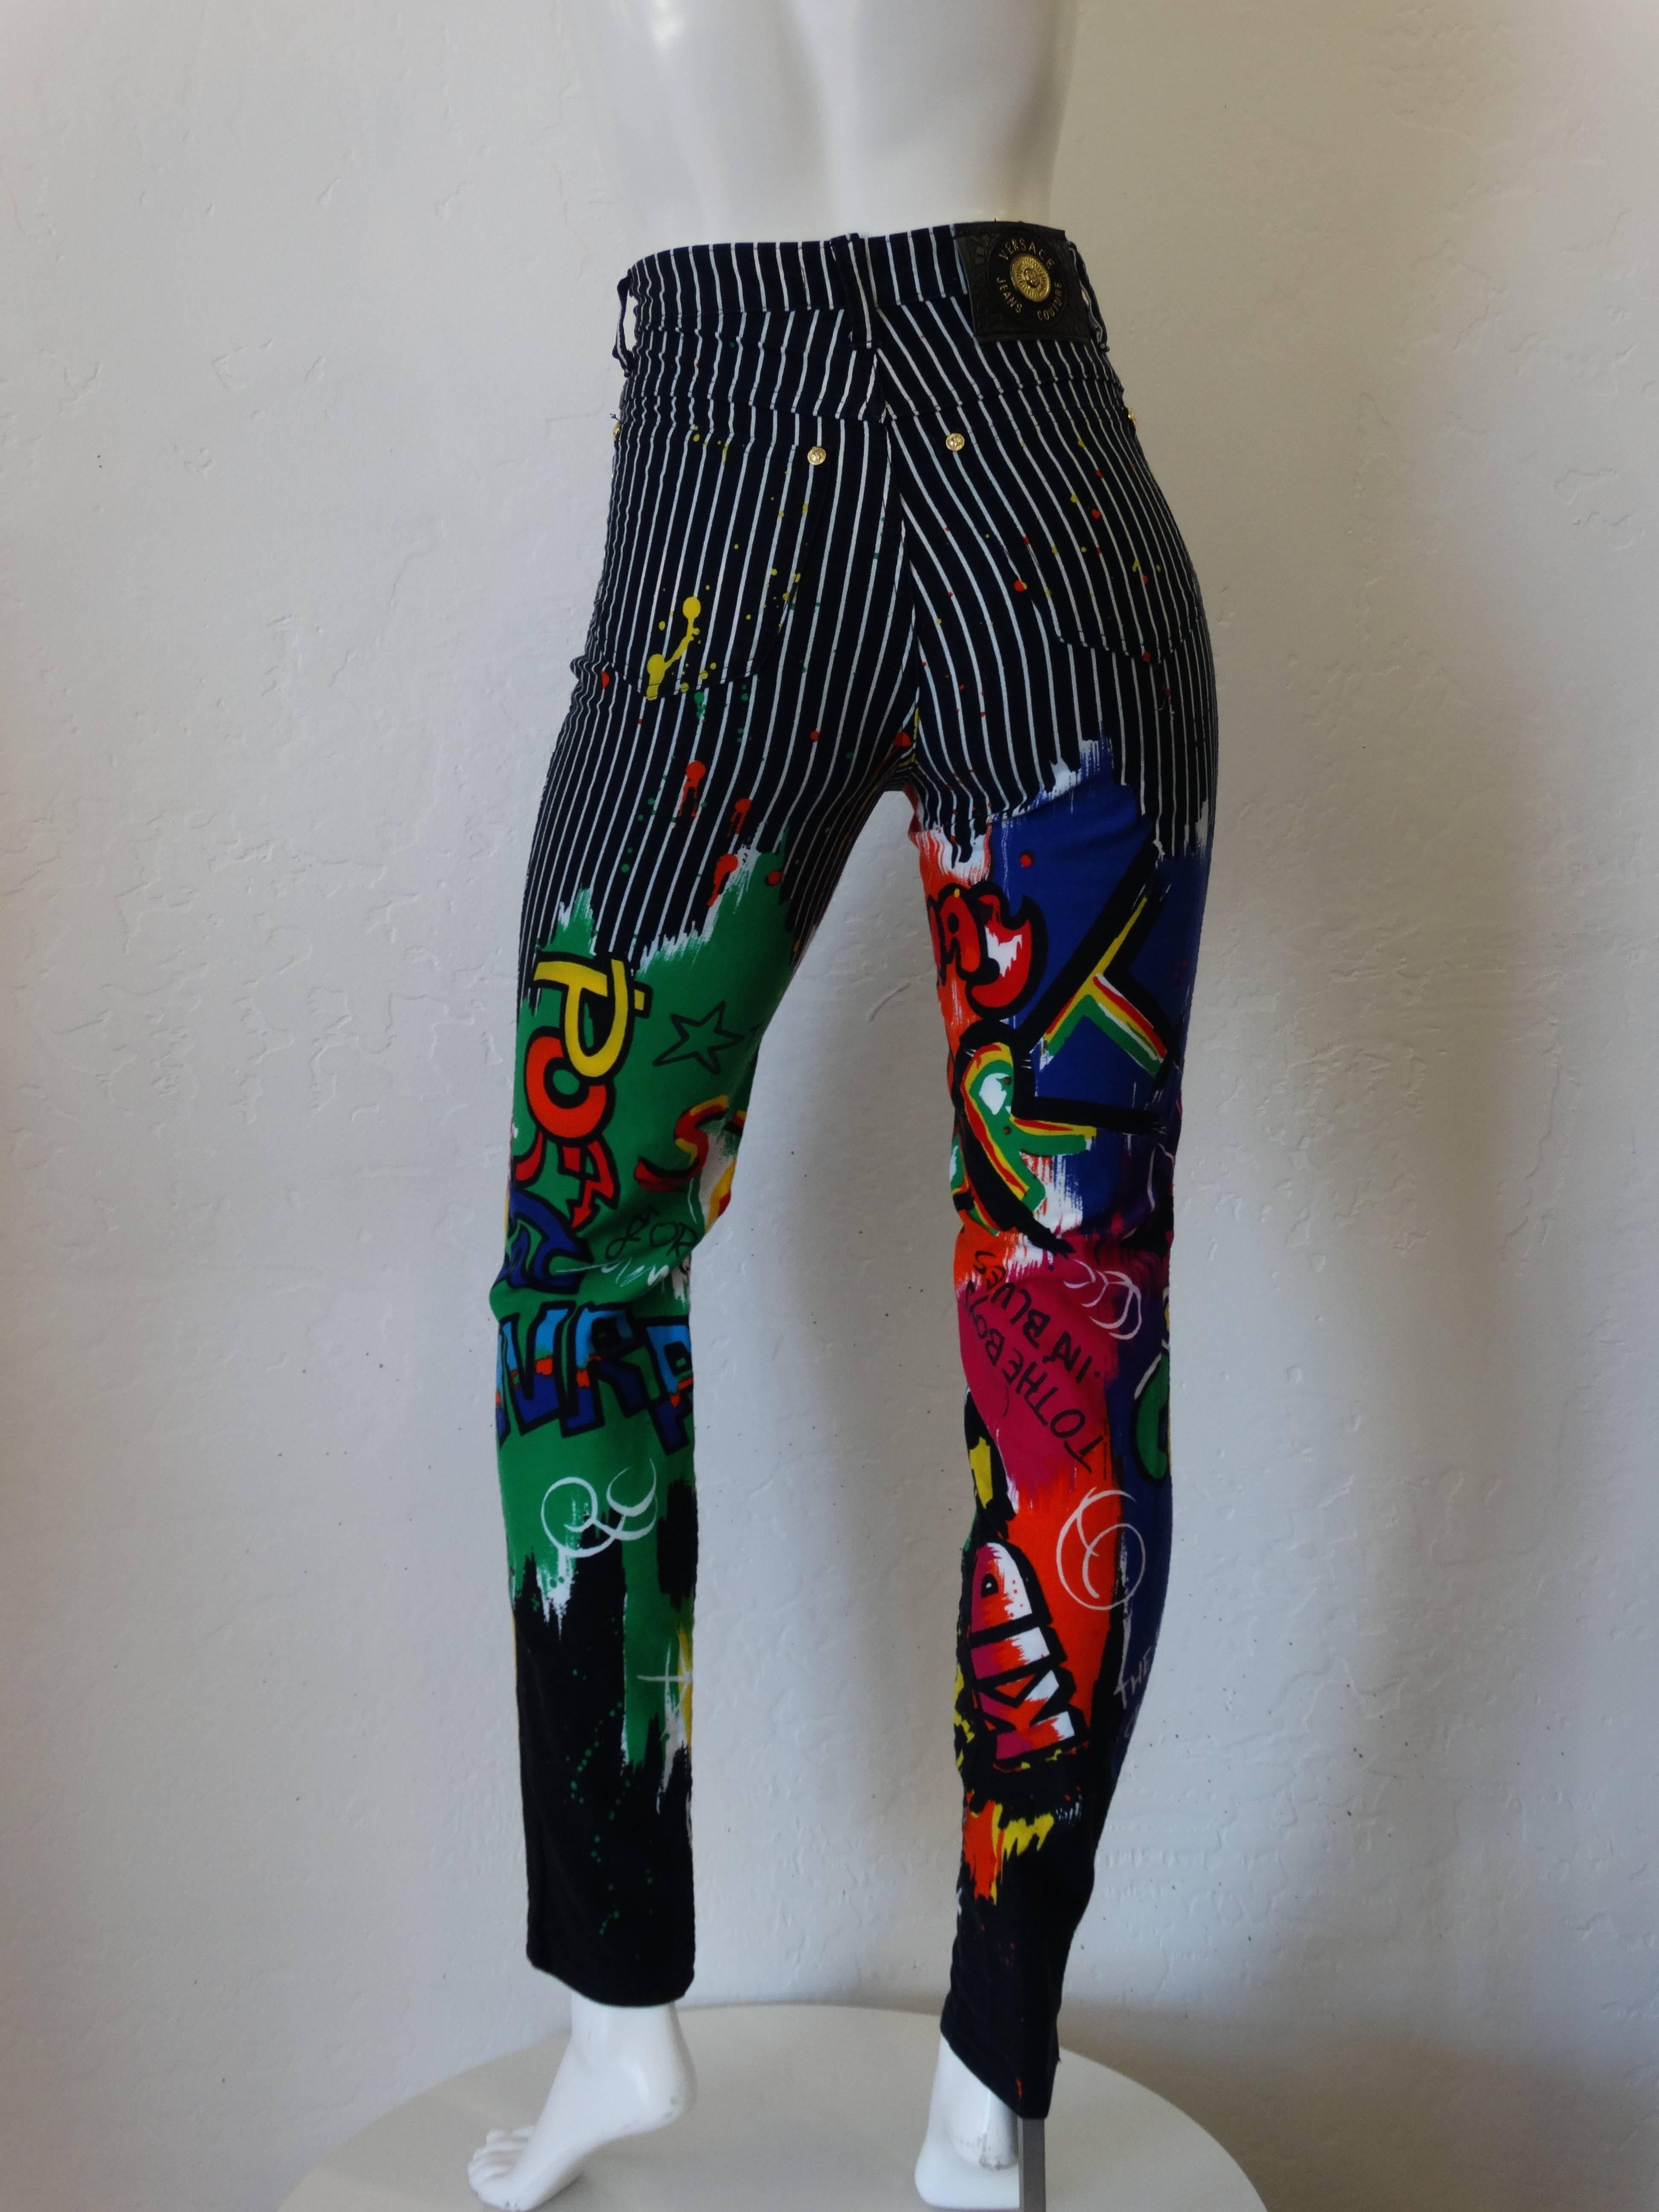 Amazing pair of 1990s Couture Versace Jeans! Bold black and white pinstripe print. Graphic multicolored graffiti with paint splatter accents. High rise with a tapered leg. Pants fit a sz 24 or 25 inch waist. Made in Italy 